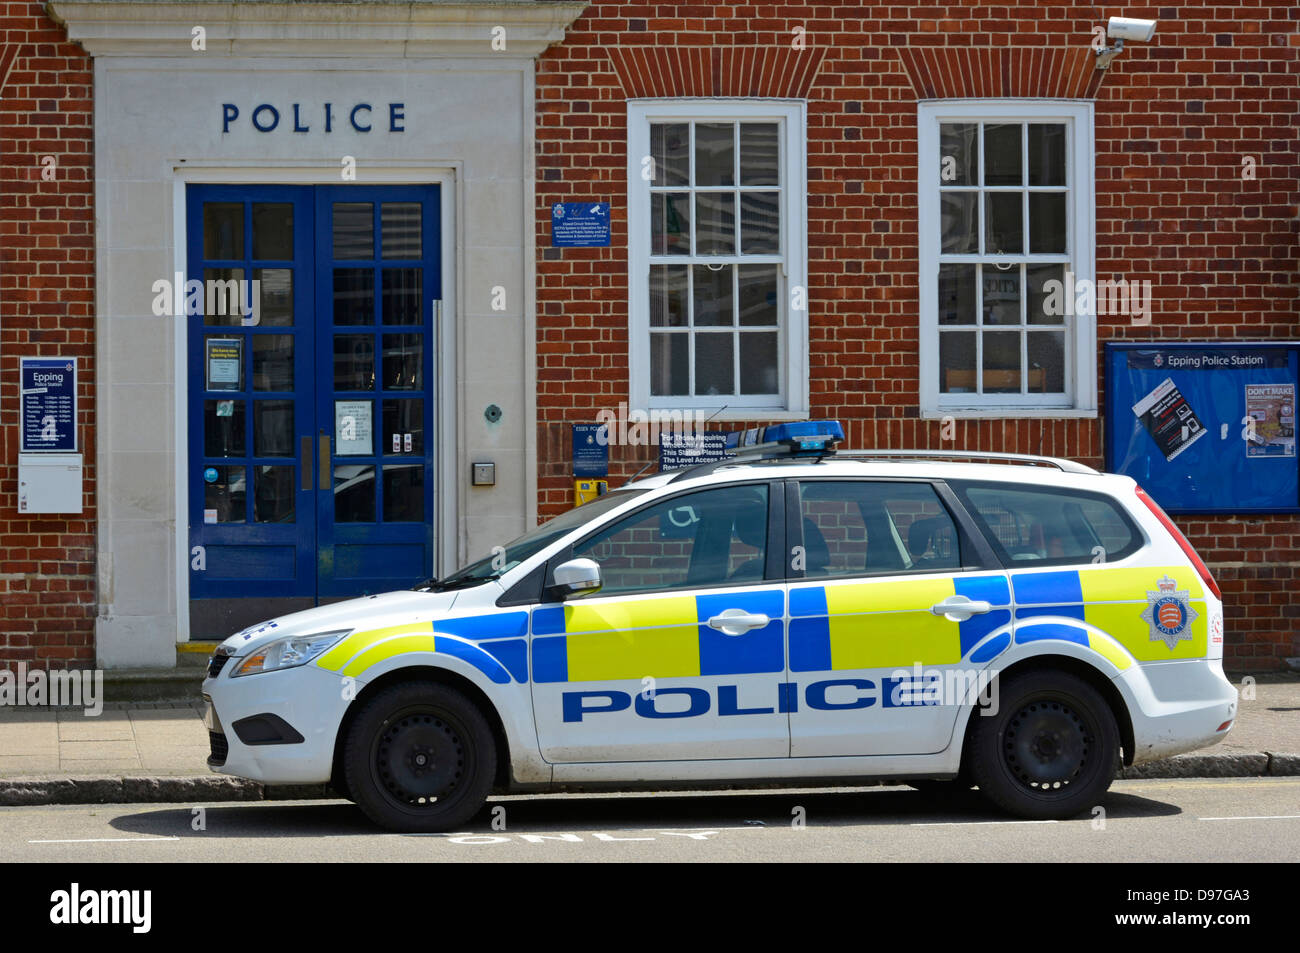 Essex constabulary Epping Police Station building side view of police car Battenburg Battenberg high-visibility emergency service markings England UK Stock Photo